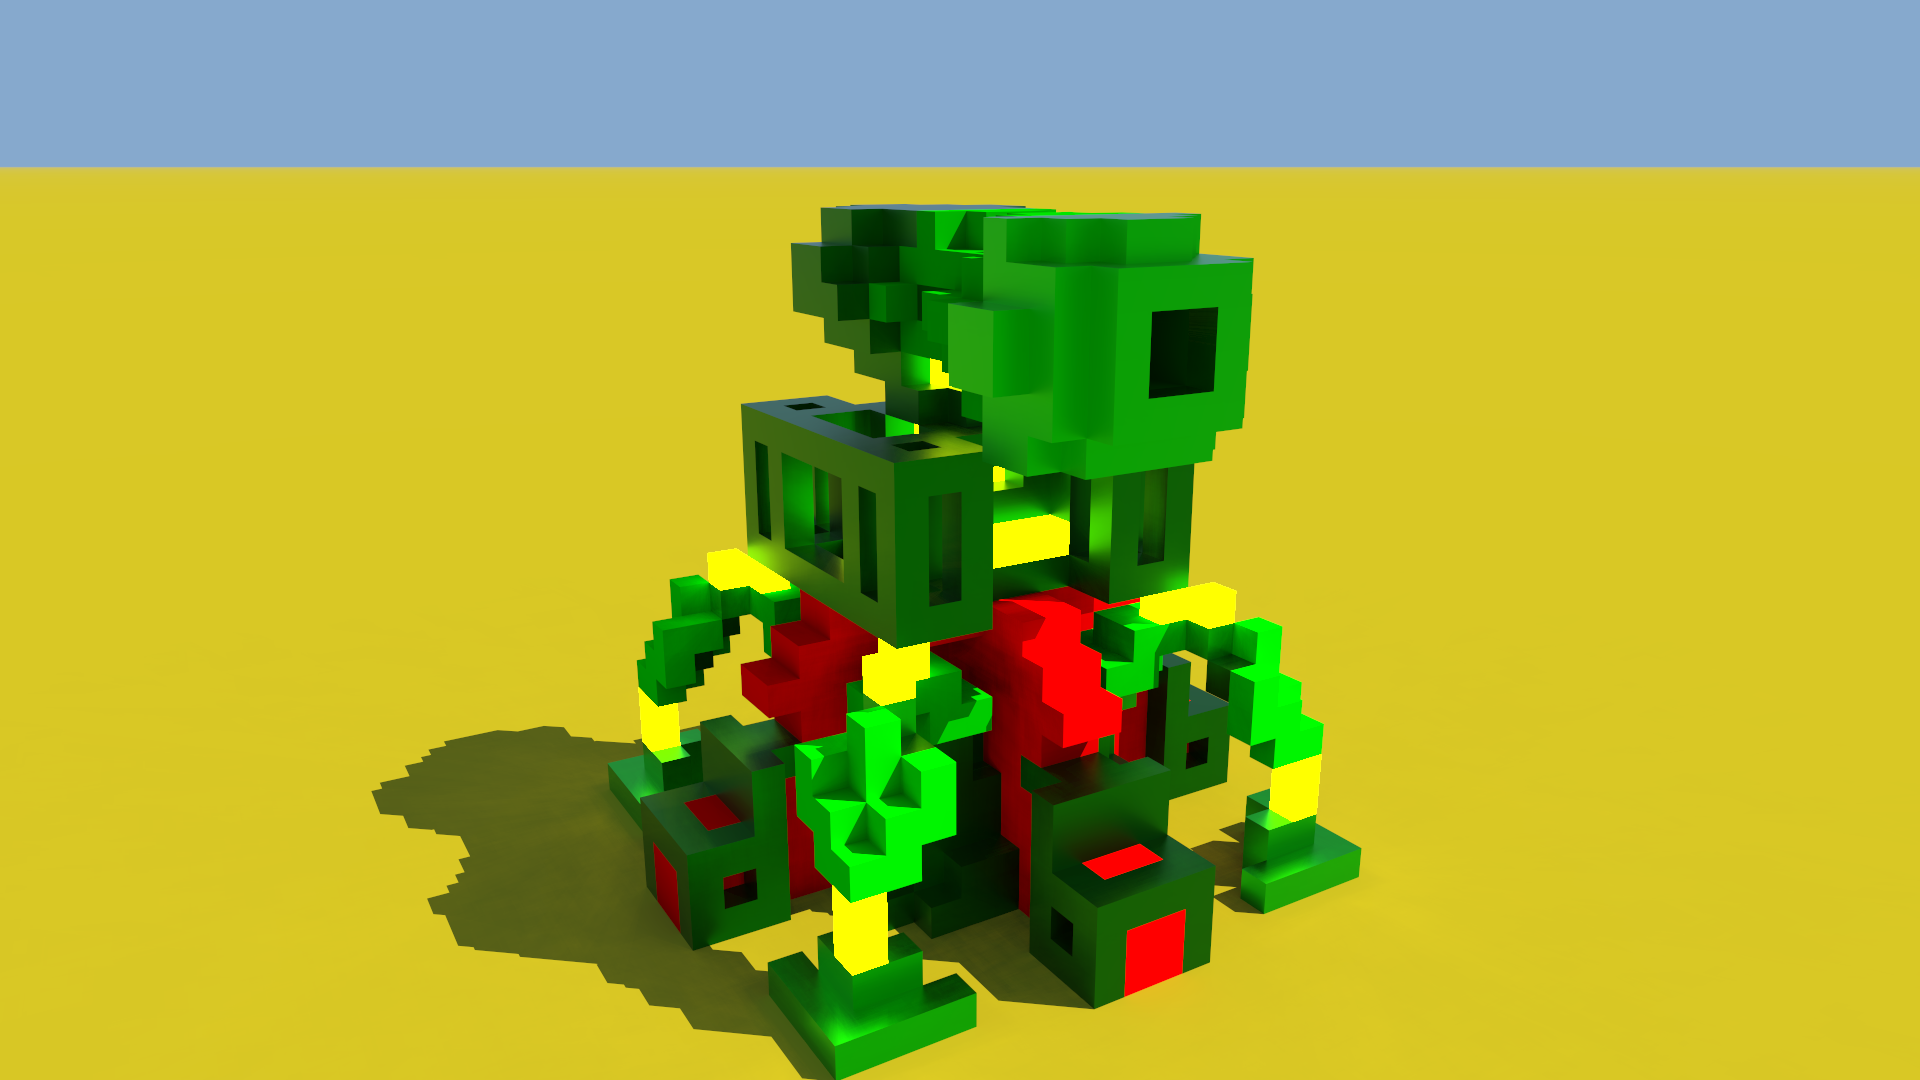 It's a turret made using voxels. by Mastaan